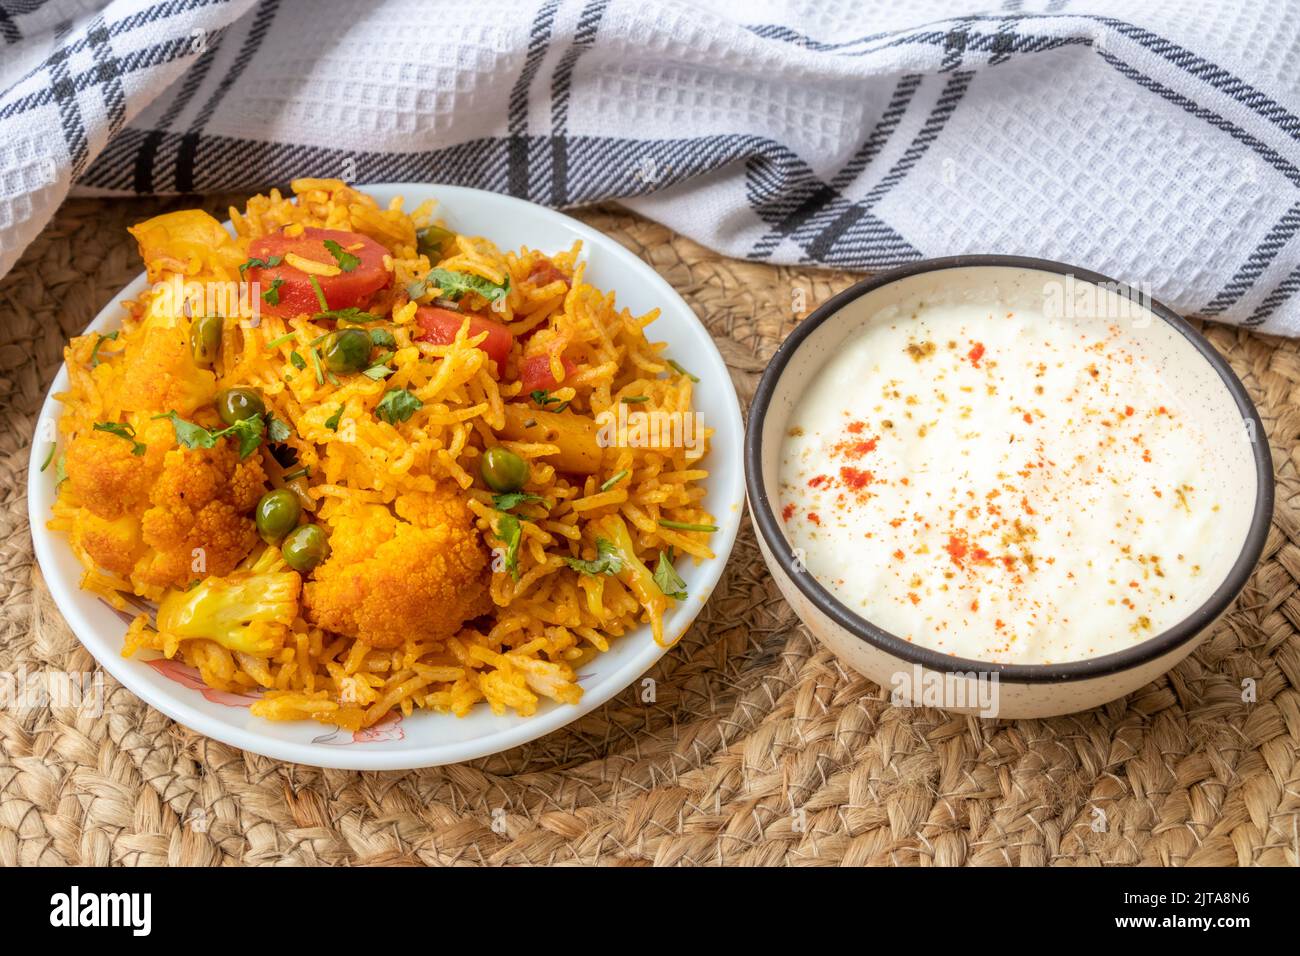 Vegetable pulao recipe with curd made with basmati rice and mix vegetables served in a round plate Stock Photo